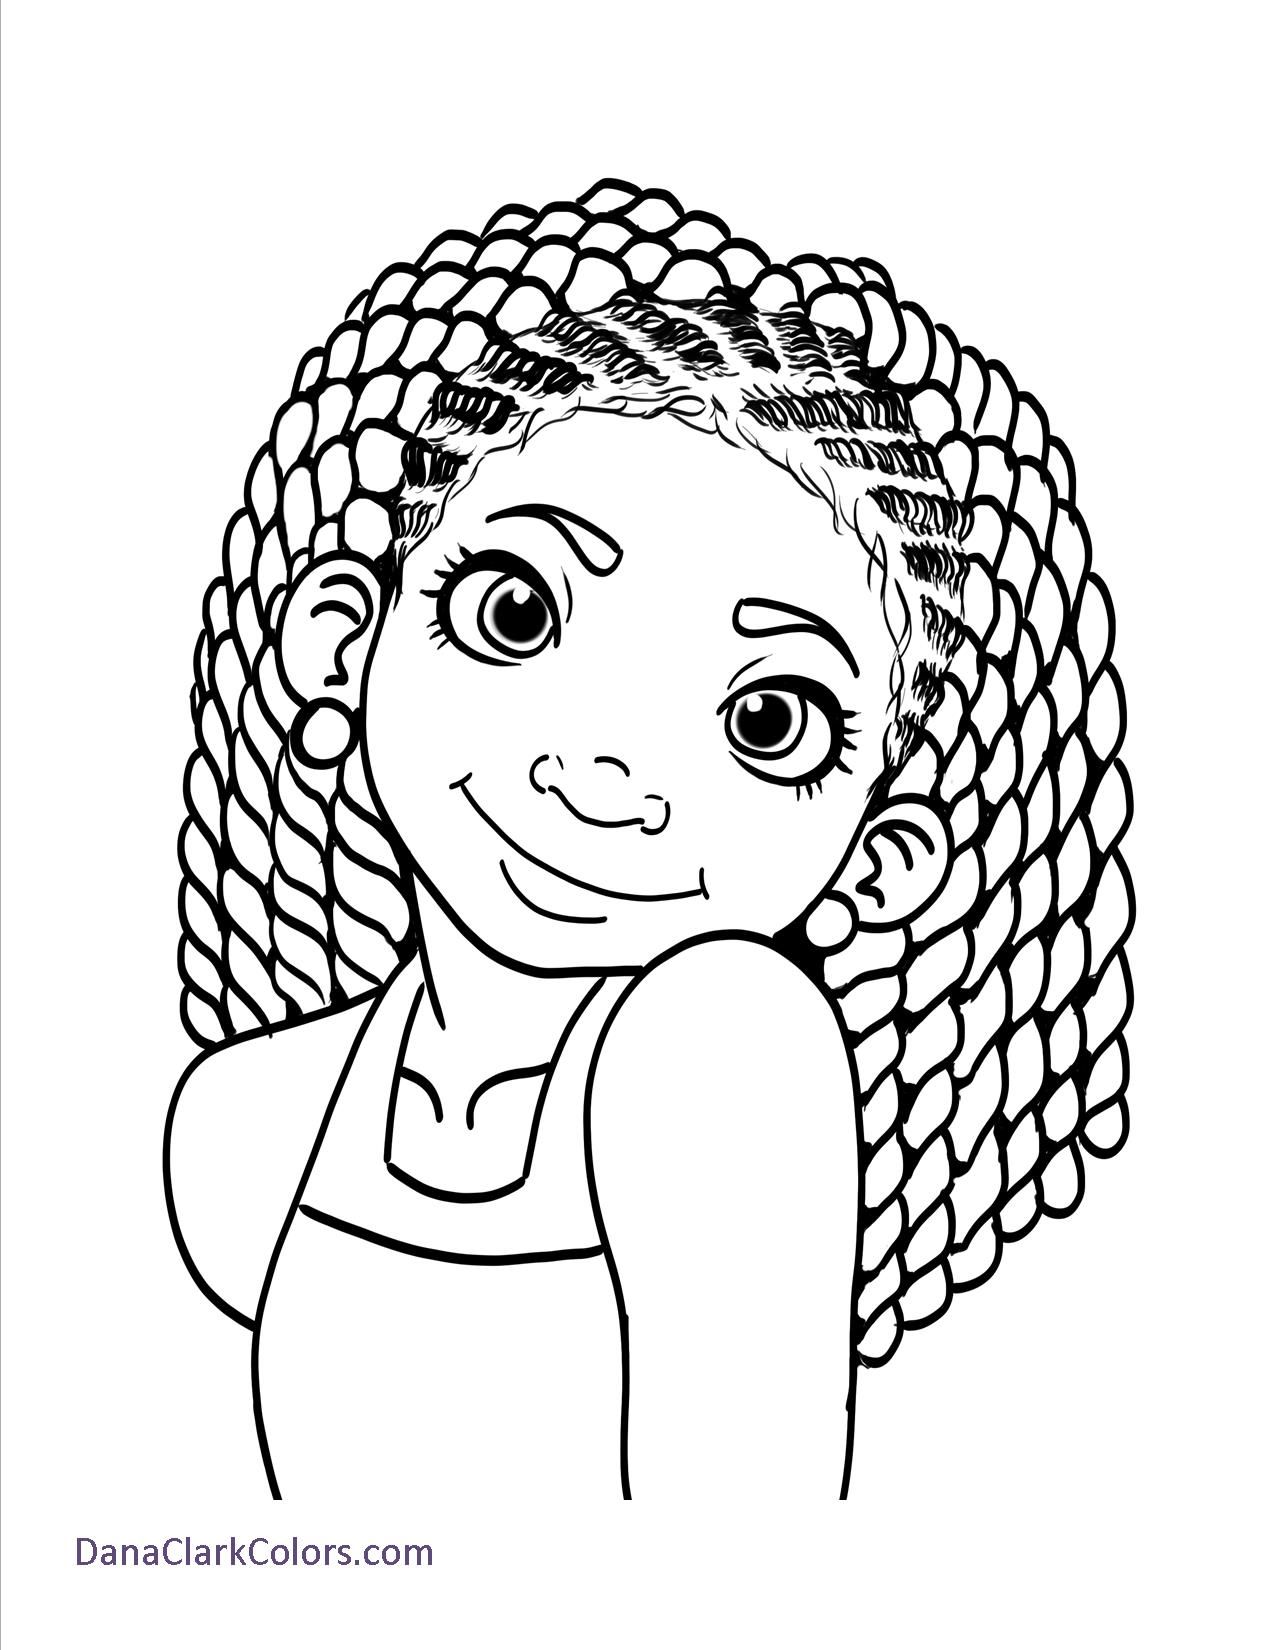 Free Coloring Pages | Coloring pages for girls, Coloring books, Drawings of black  girls